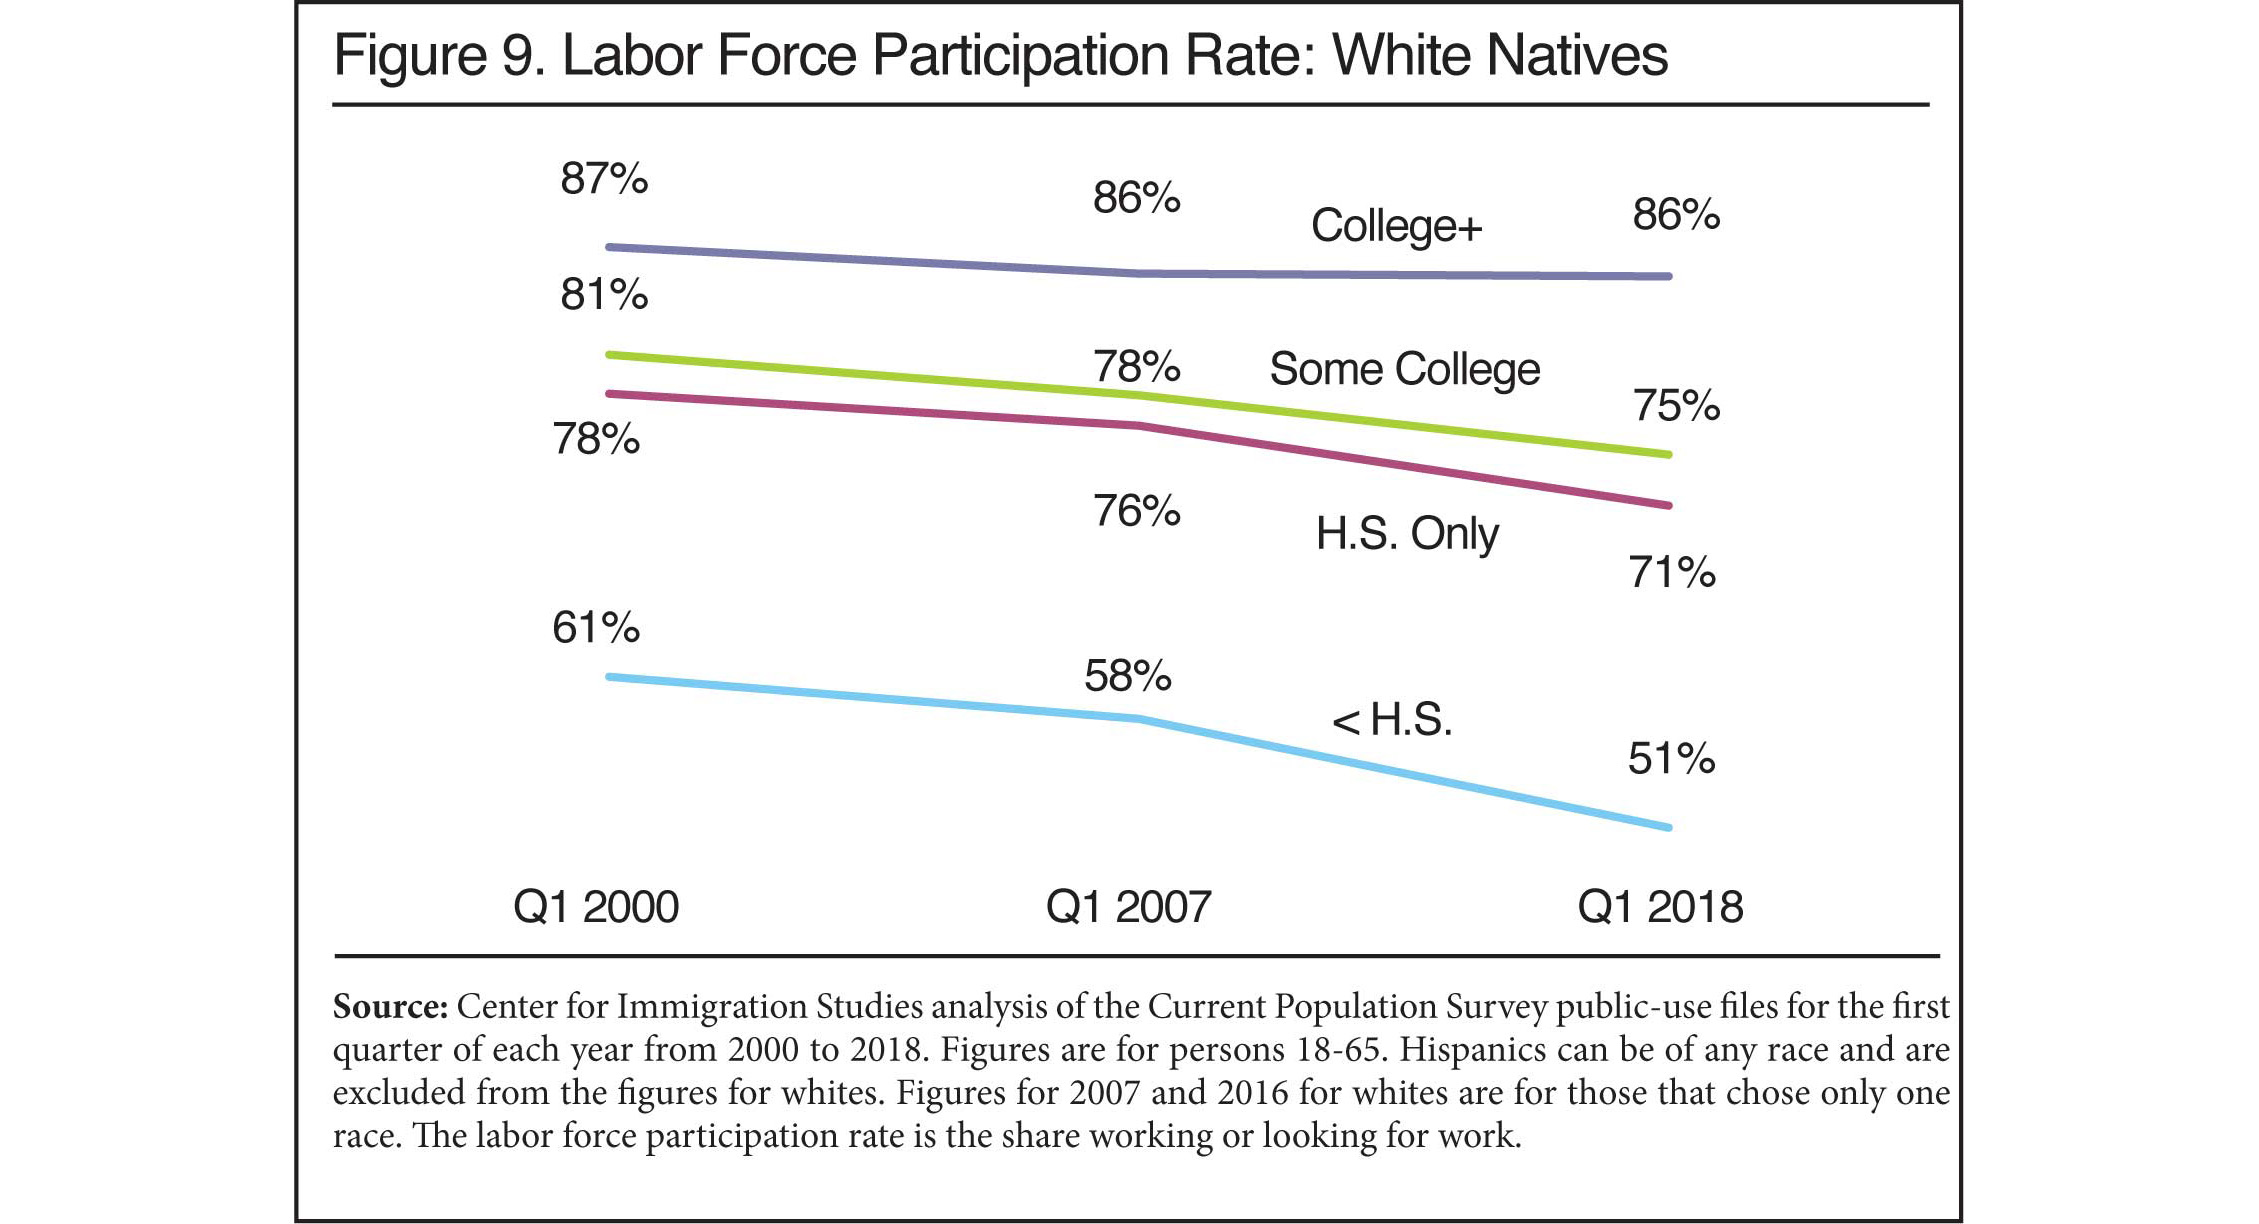 Graph: Labor Force Participation Rate for White Natives, 2000 to 2018